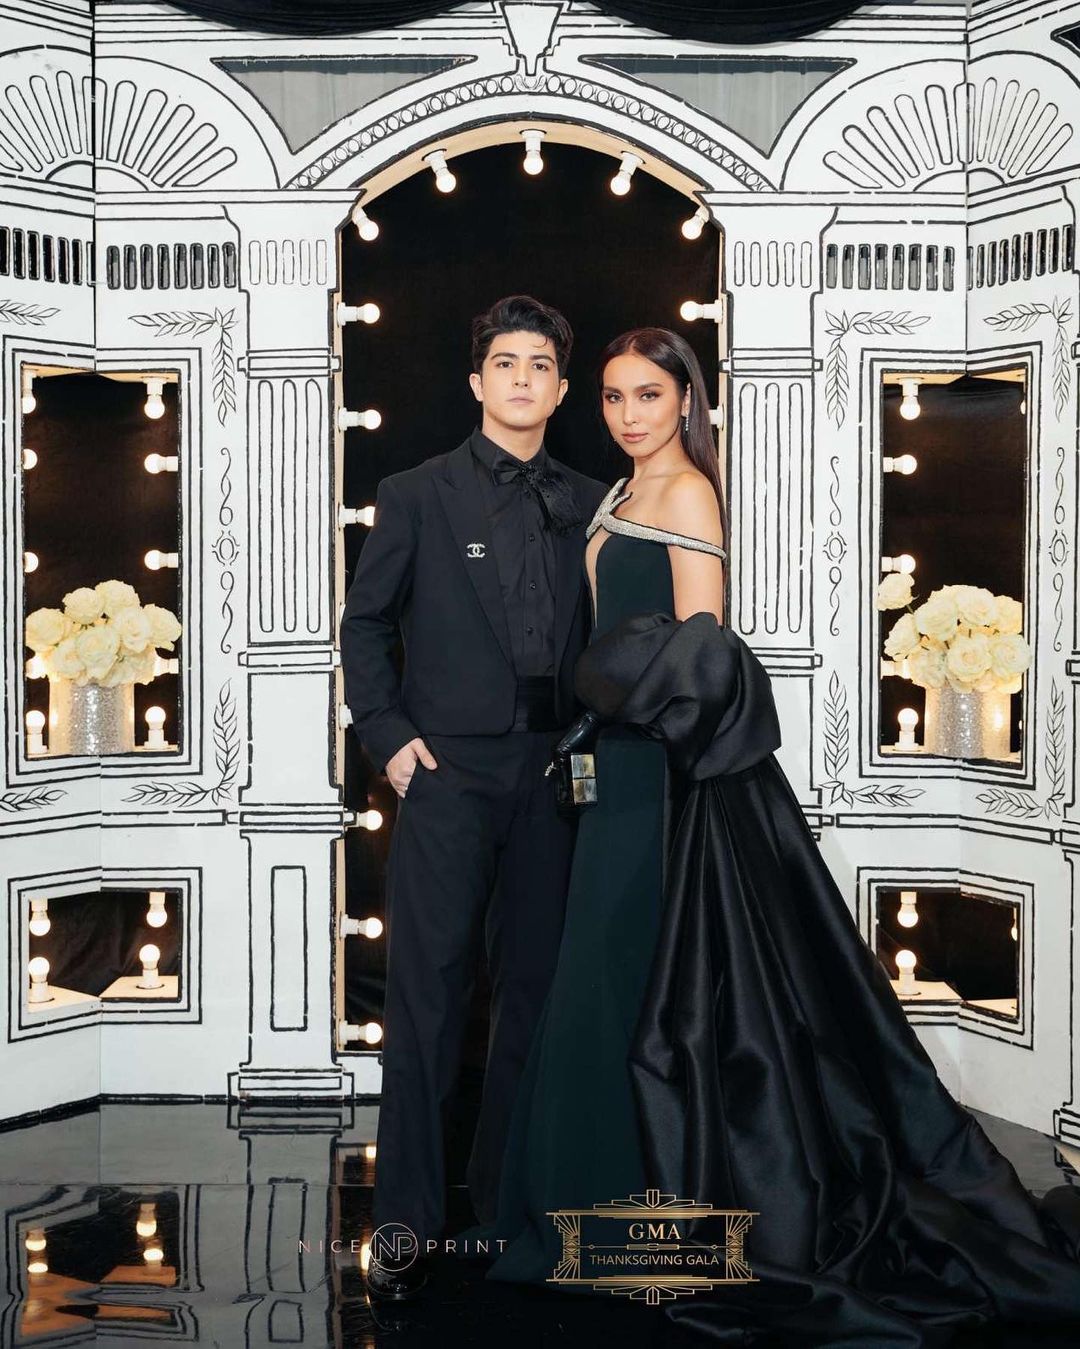 Best Dressed List at the 2022 GMA Gala Night Preview.ph